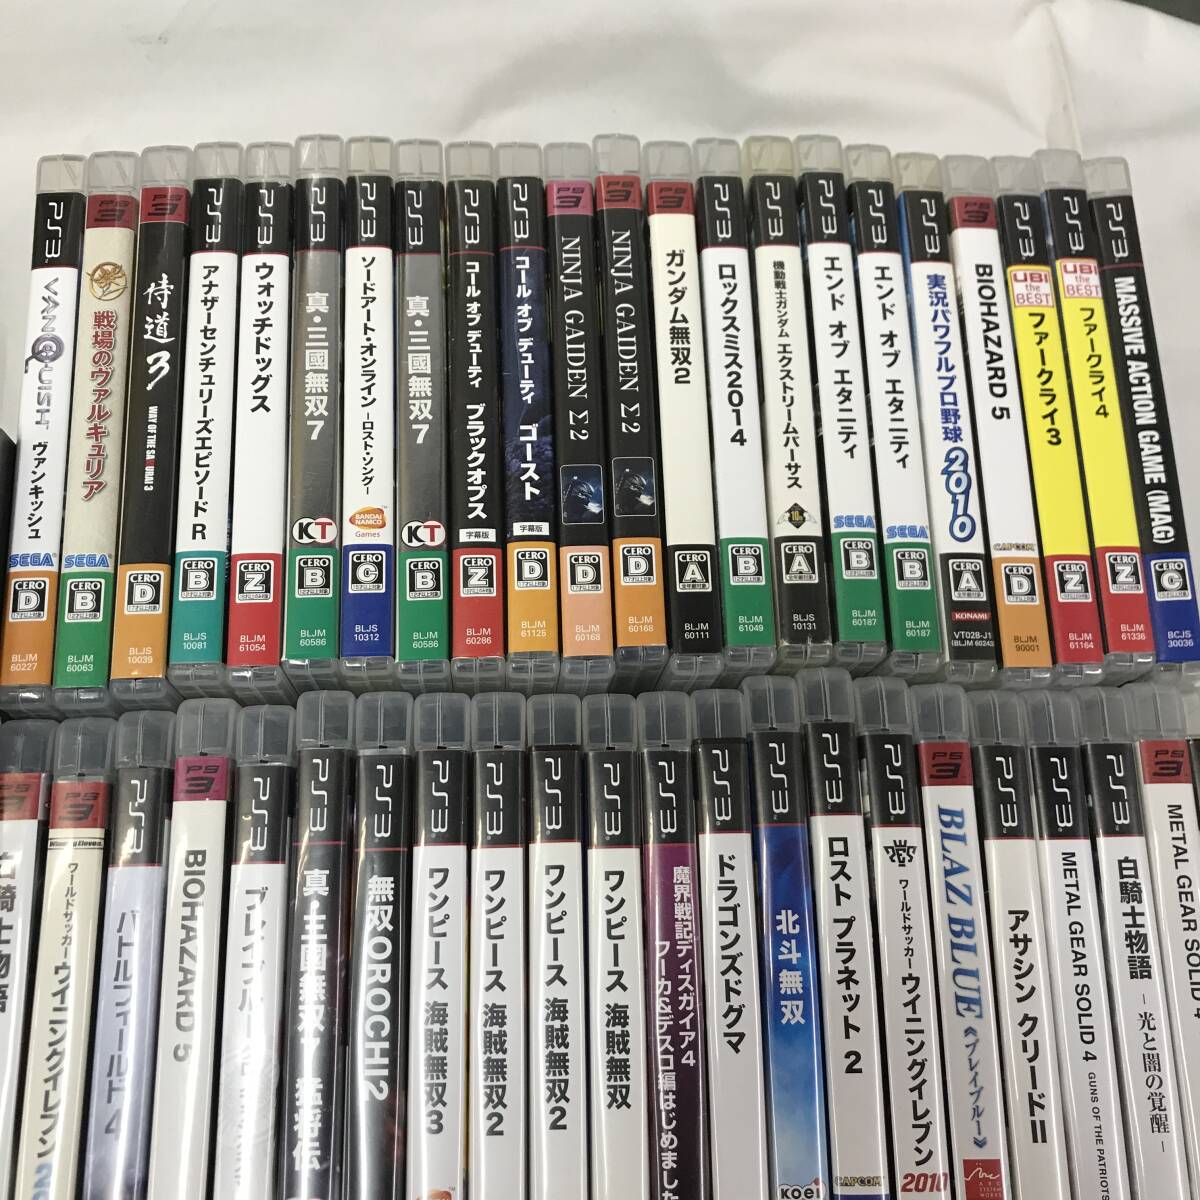 gy389 free shipping! present condition goods PlayStation 3 PS3 soft summarize 91 point set tera rear Lost Planet shu Thai nz* gate etc. 